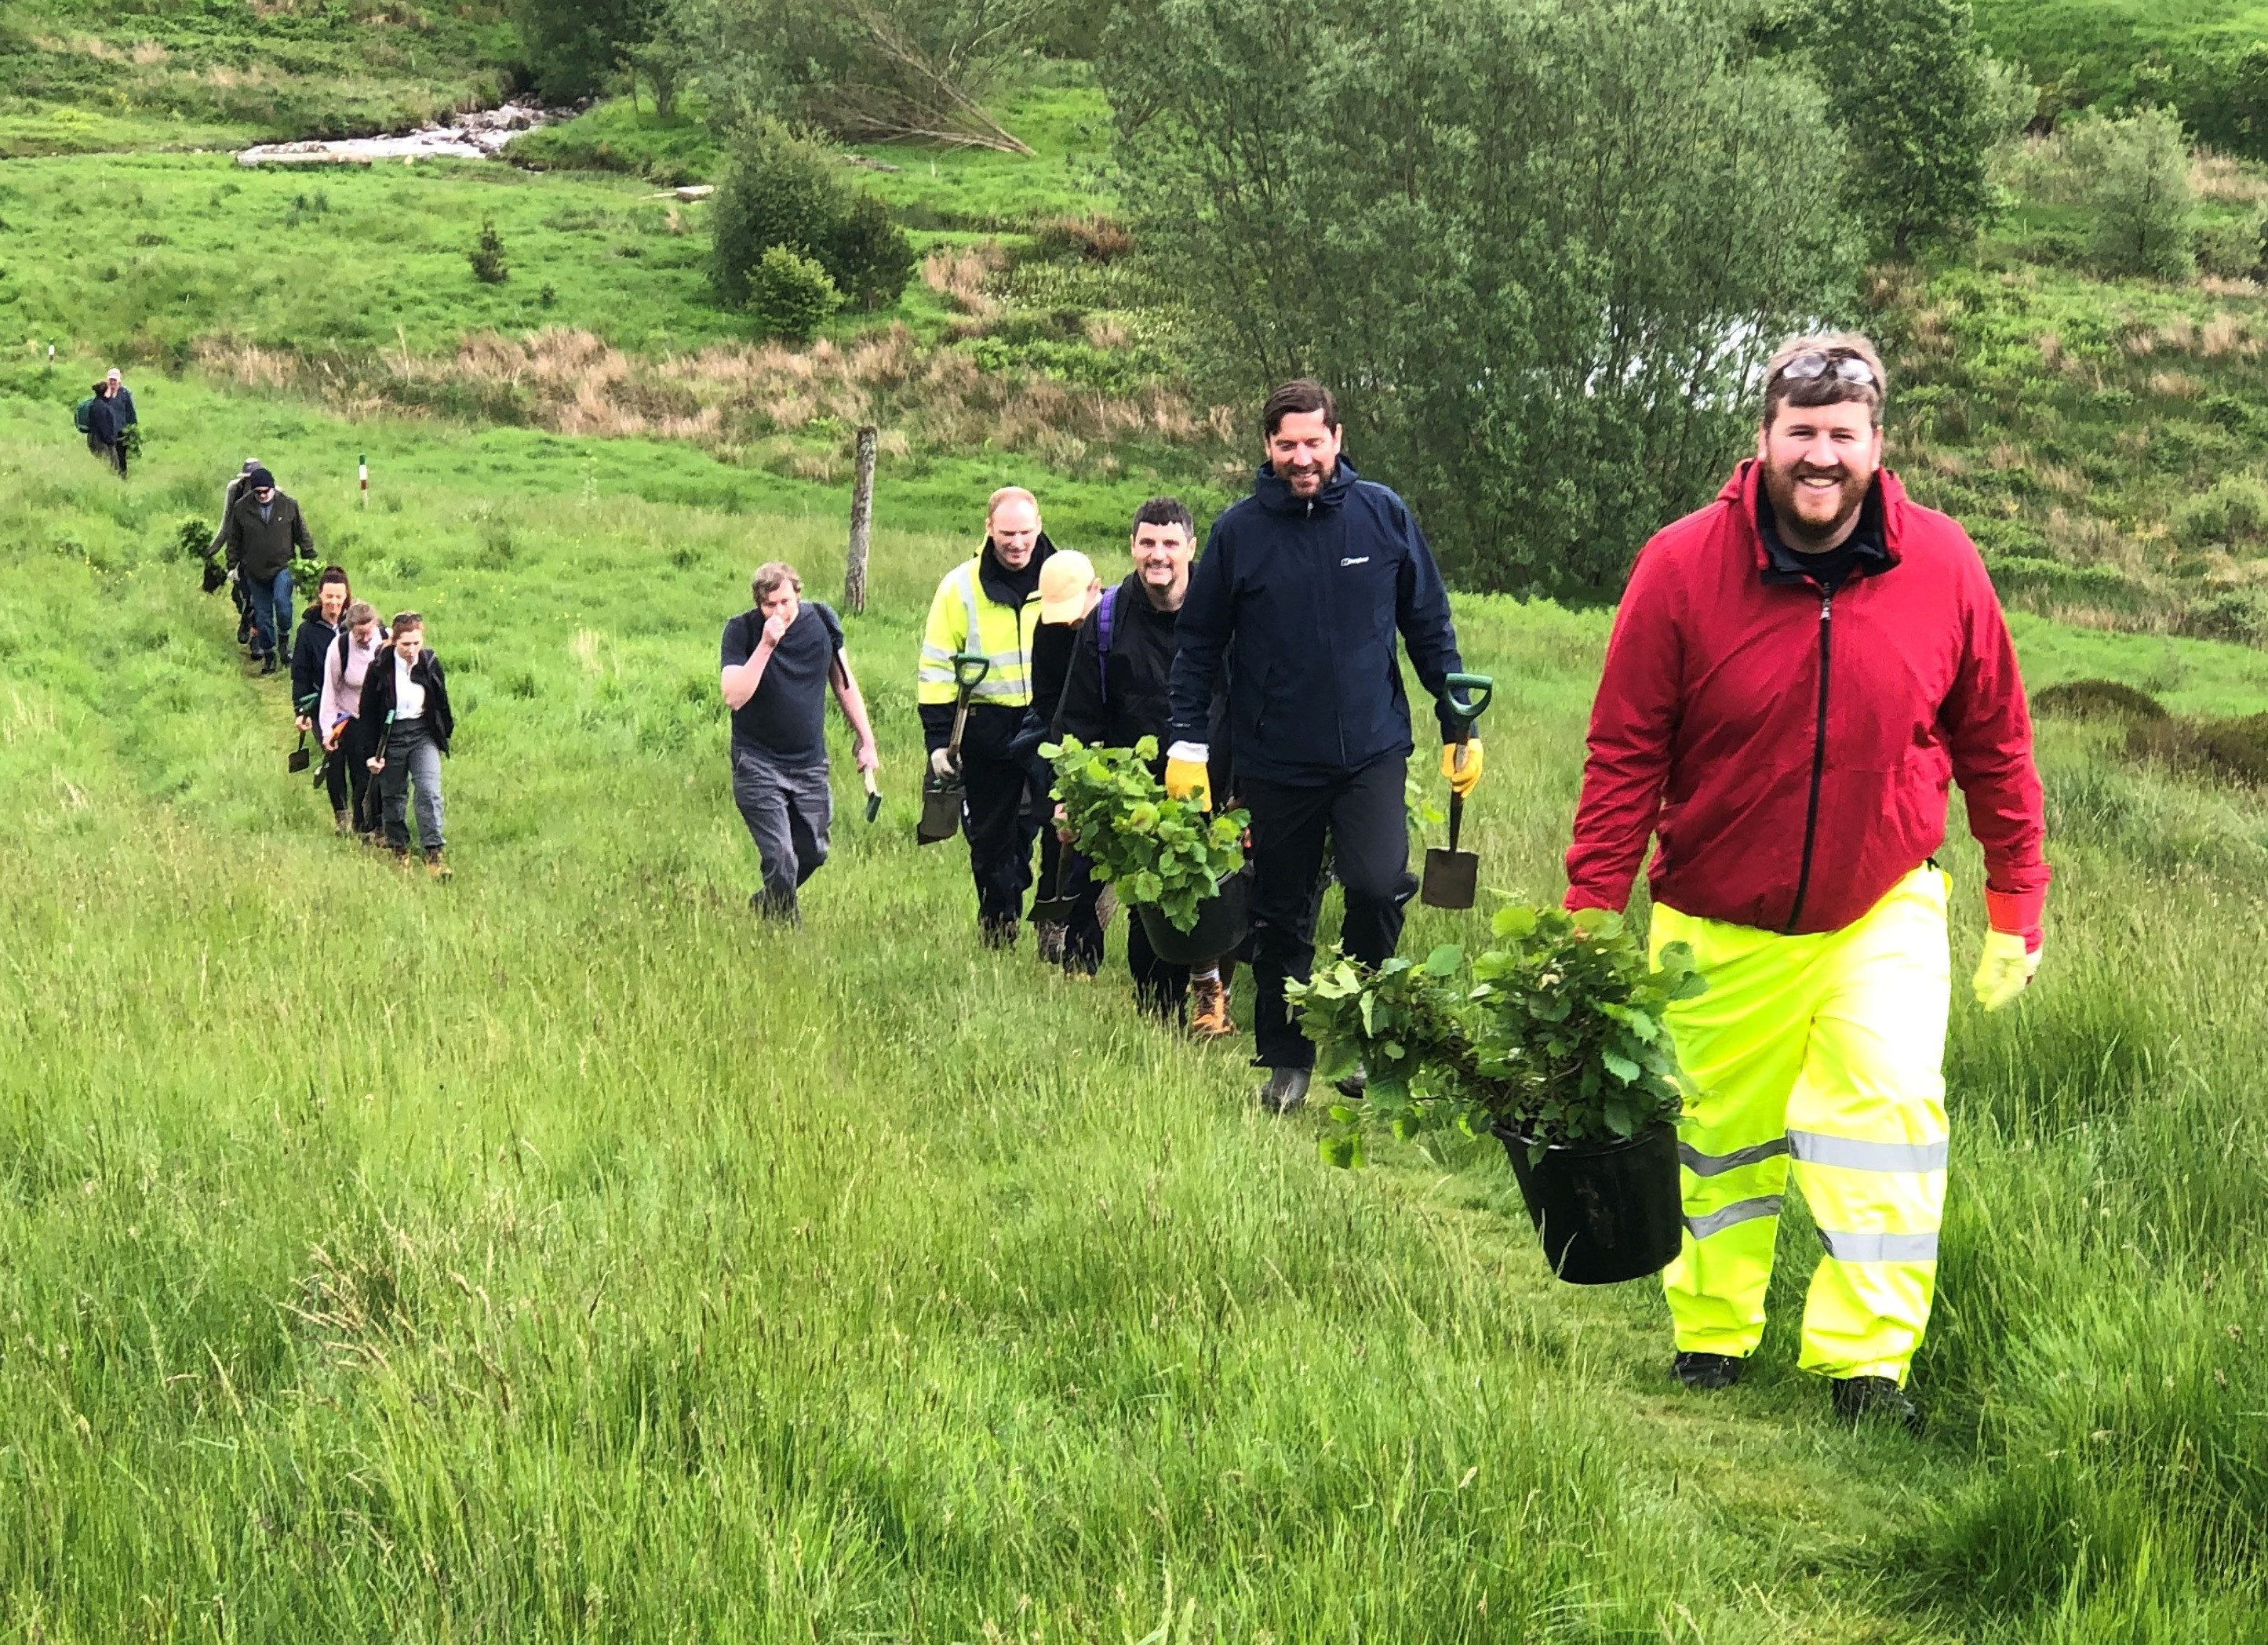 13 volunteers got involved to help plant native tree species at Dun Coillich